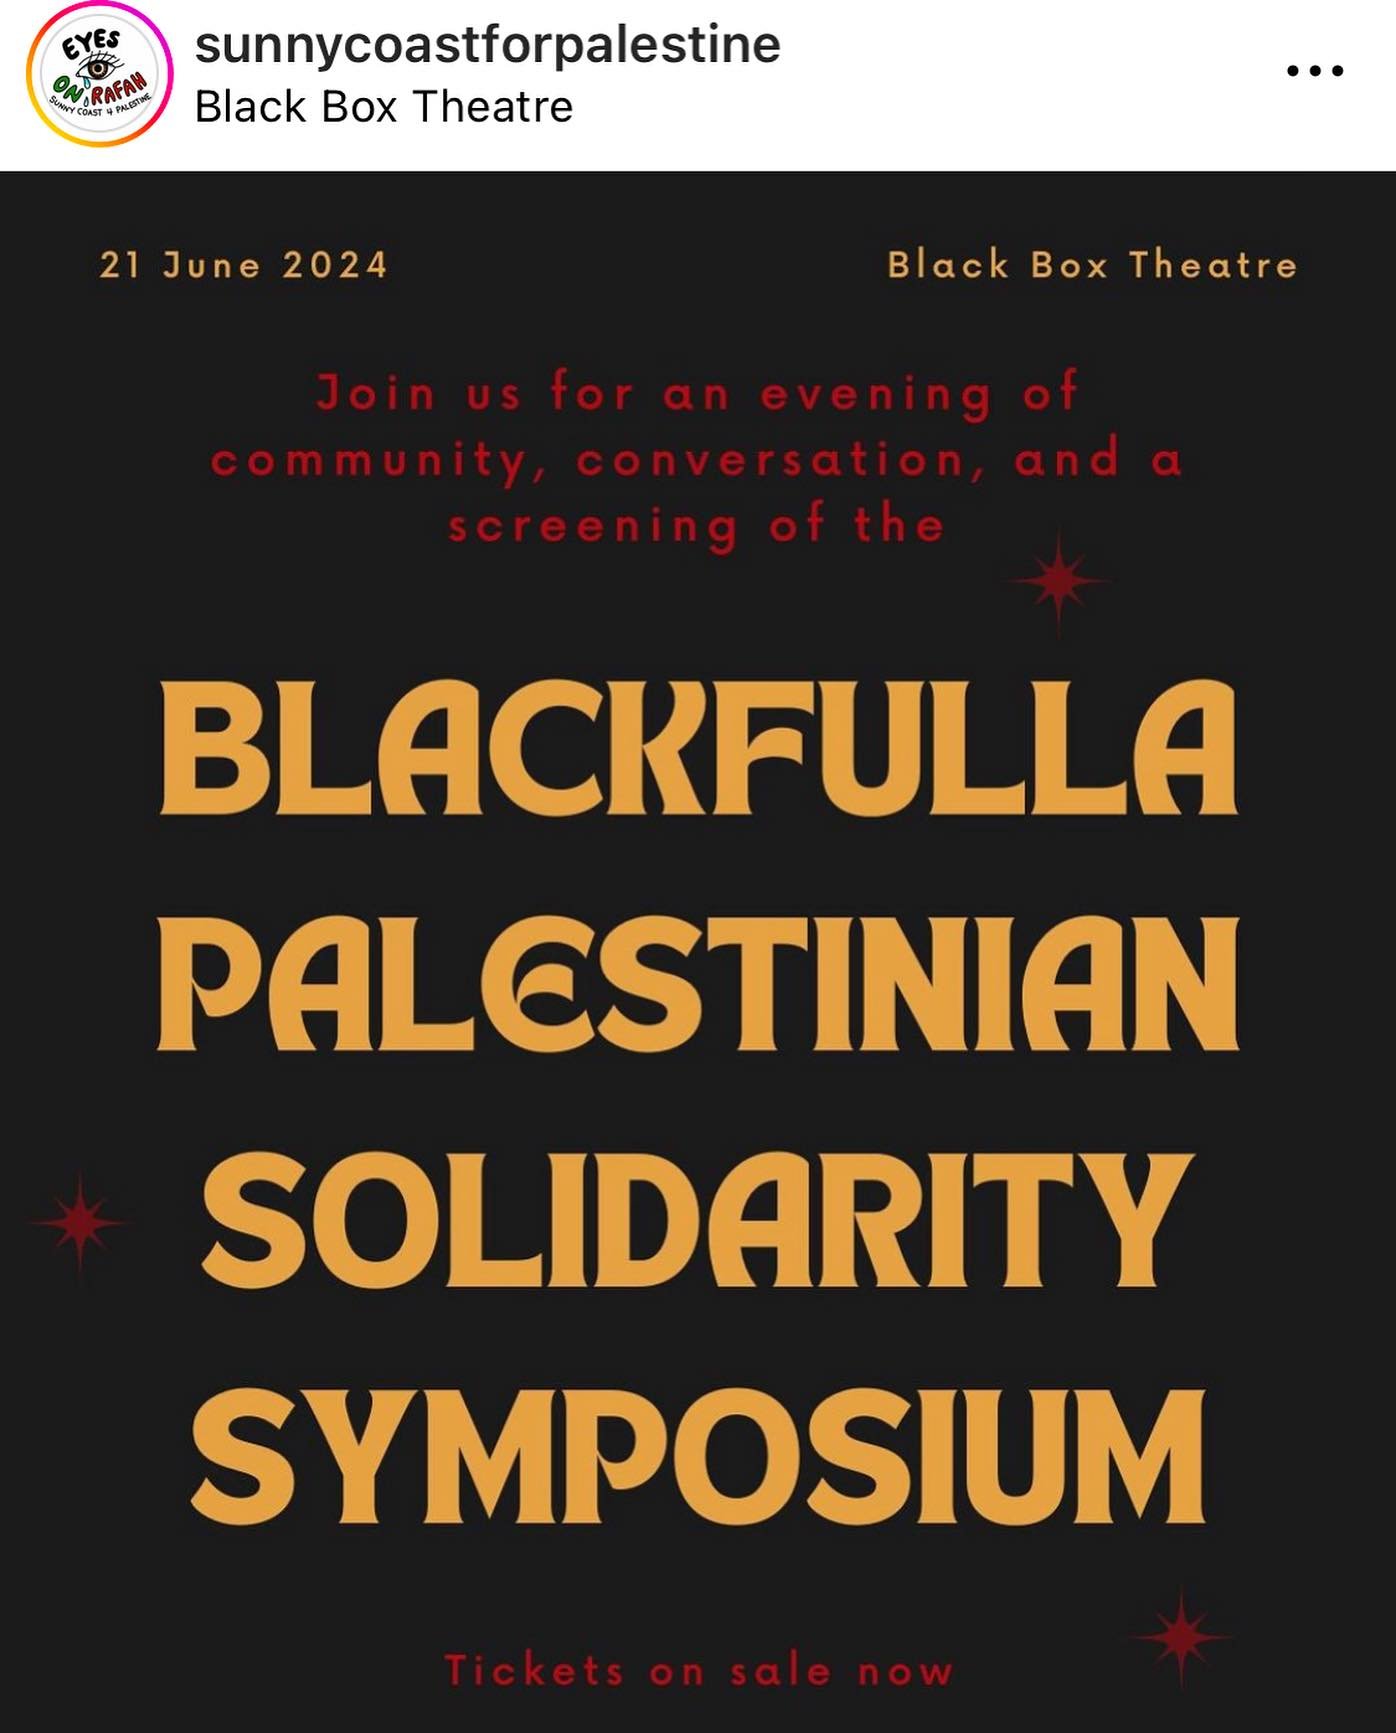 The Blackfulla-Palestinian Solidarity symposium film is coming to the Sunshine Coast 21 June at Black Box Theatre 🍉☀️

This film is designed to build solidarities, fuel our movement &amp; continue to ground our activism in Indigenous sovereignty. 

